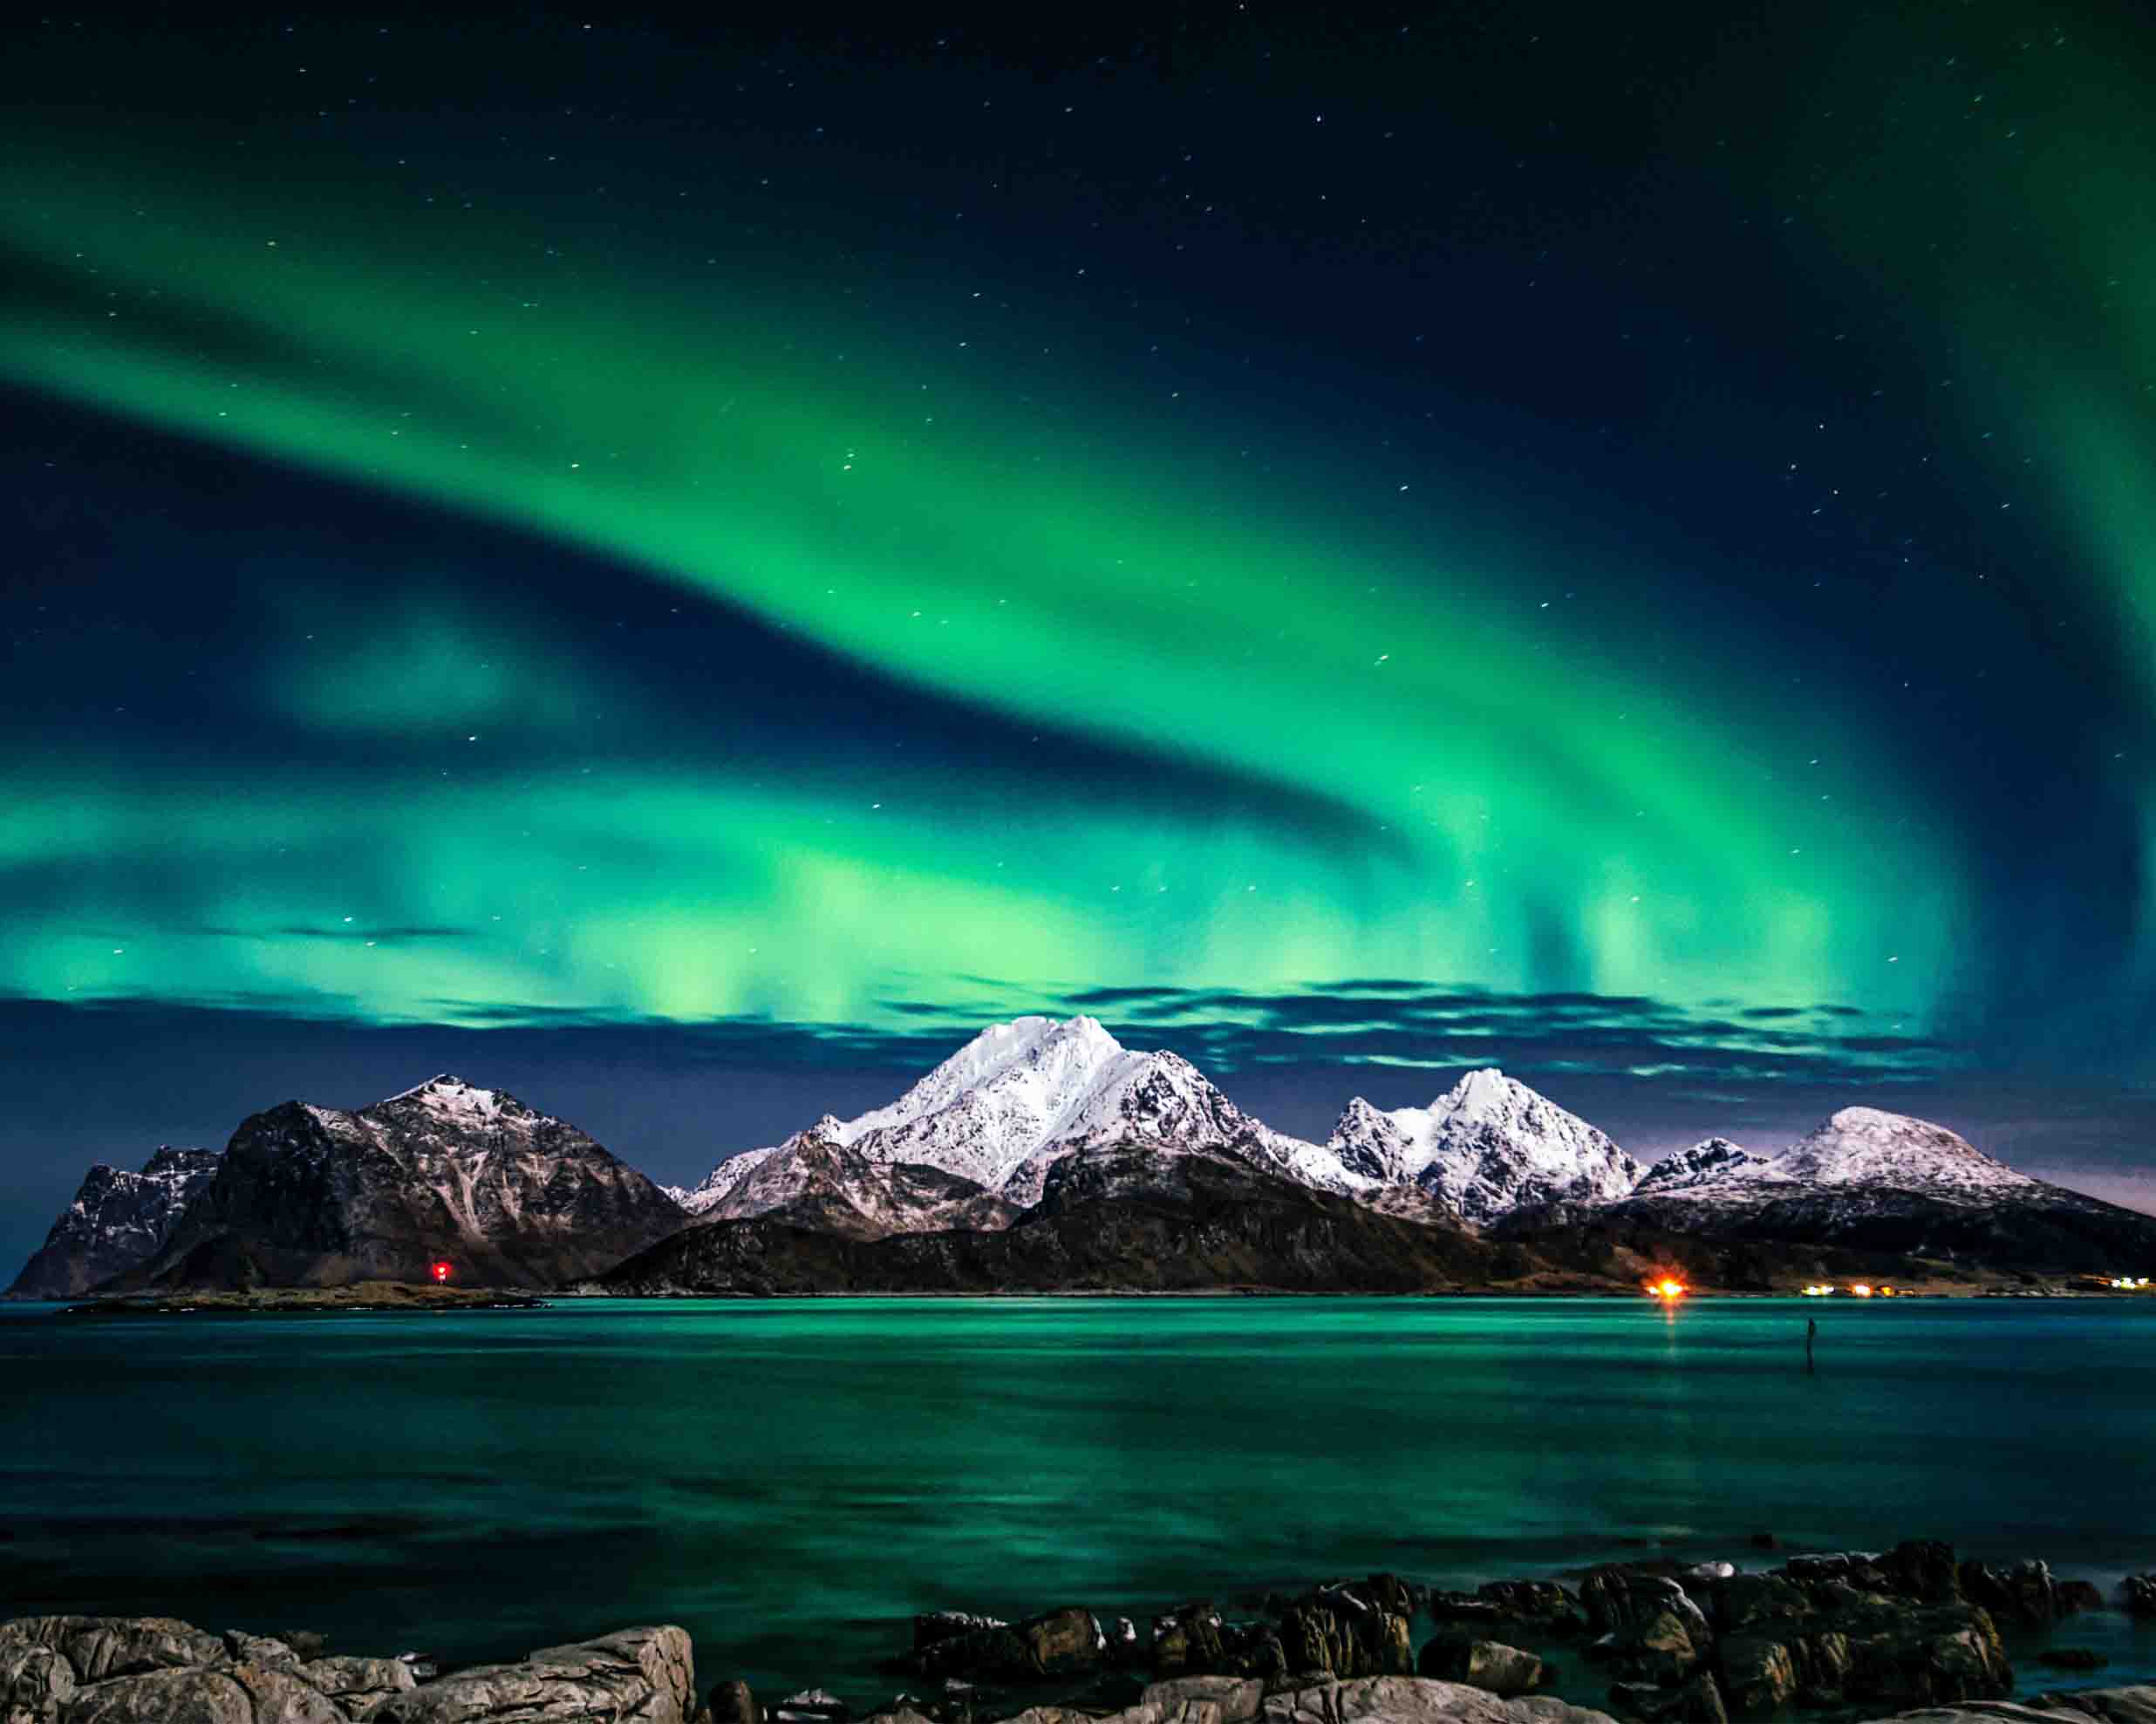 a wide shot of the Aurora Borealis in Iceland